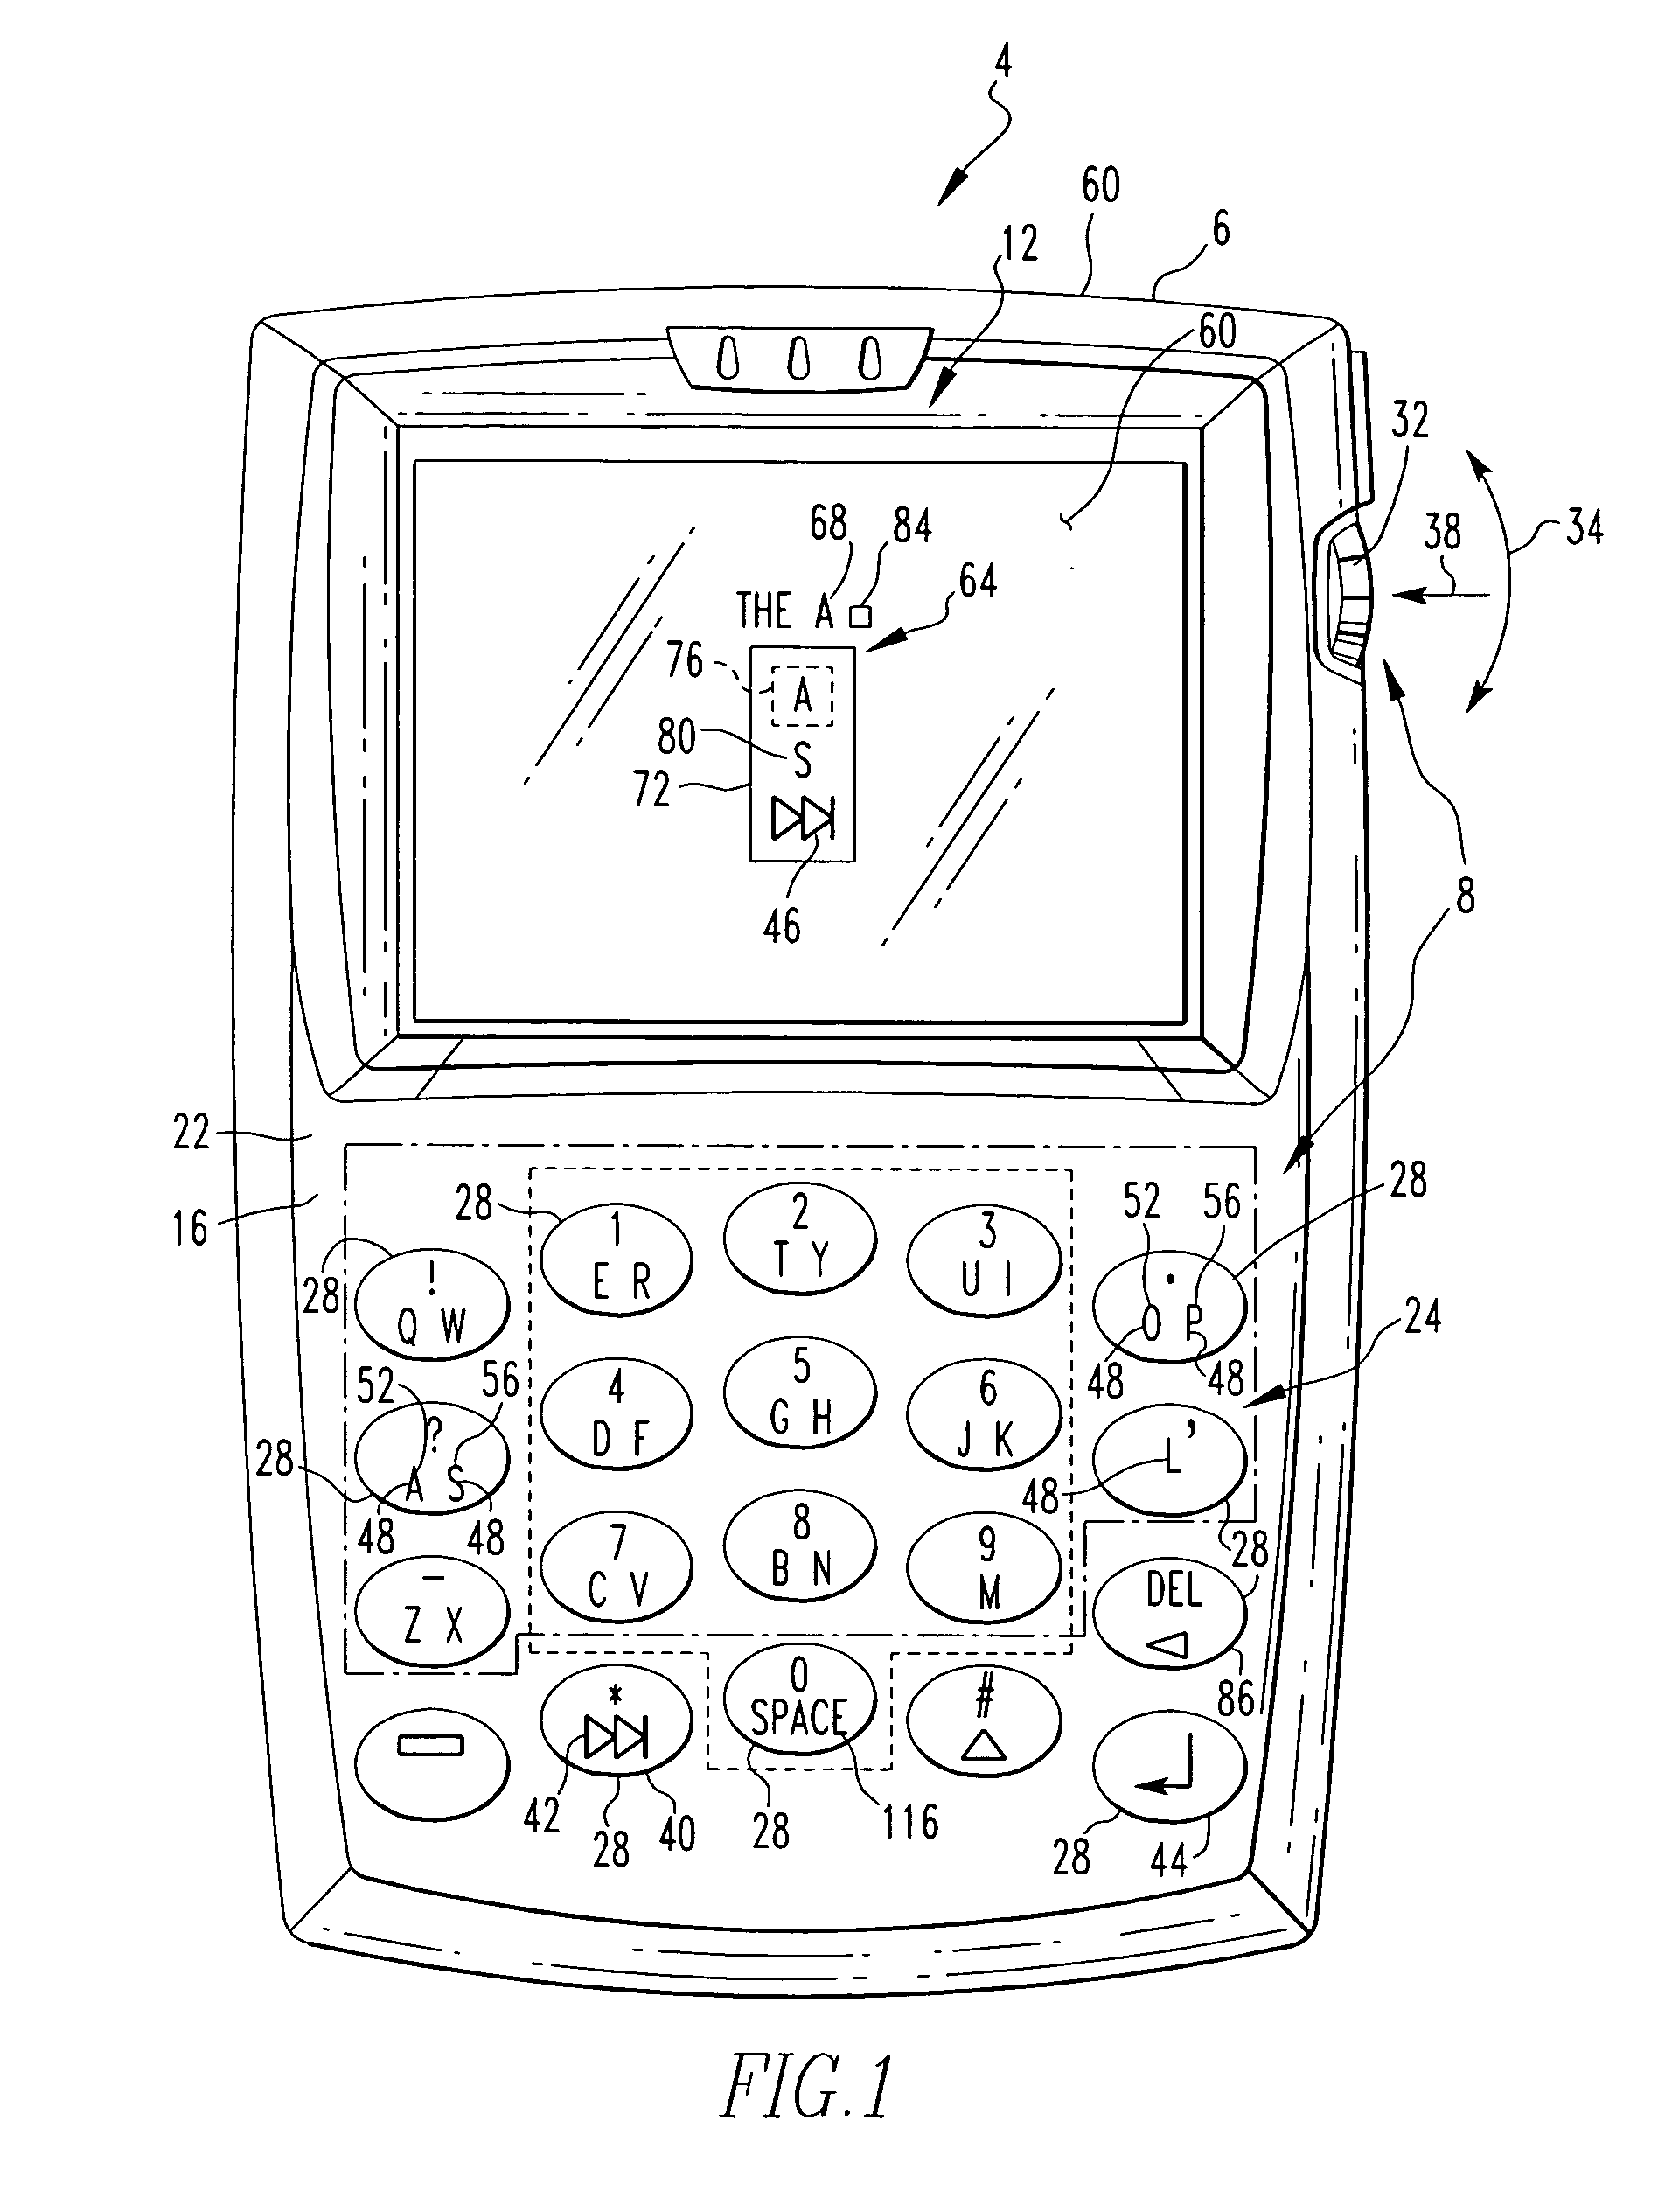 Handheld electronic device with text disambiguation